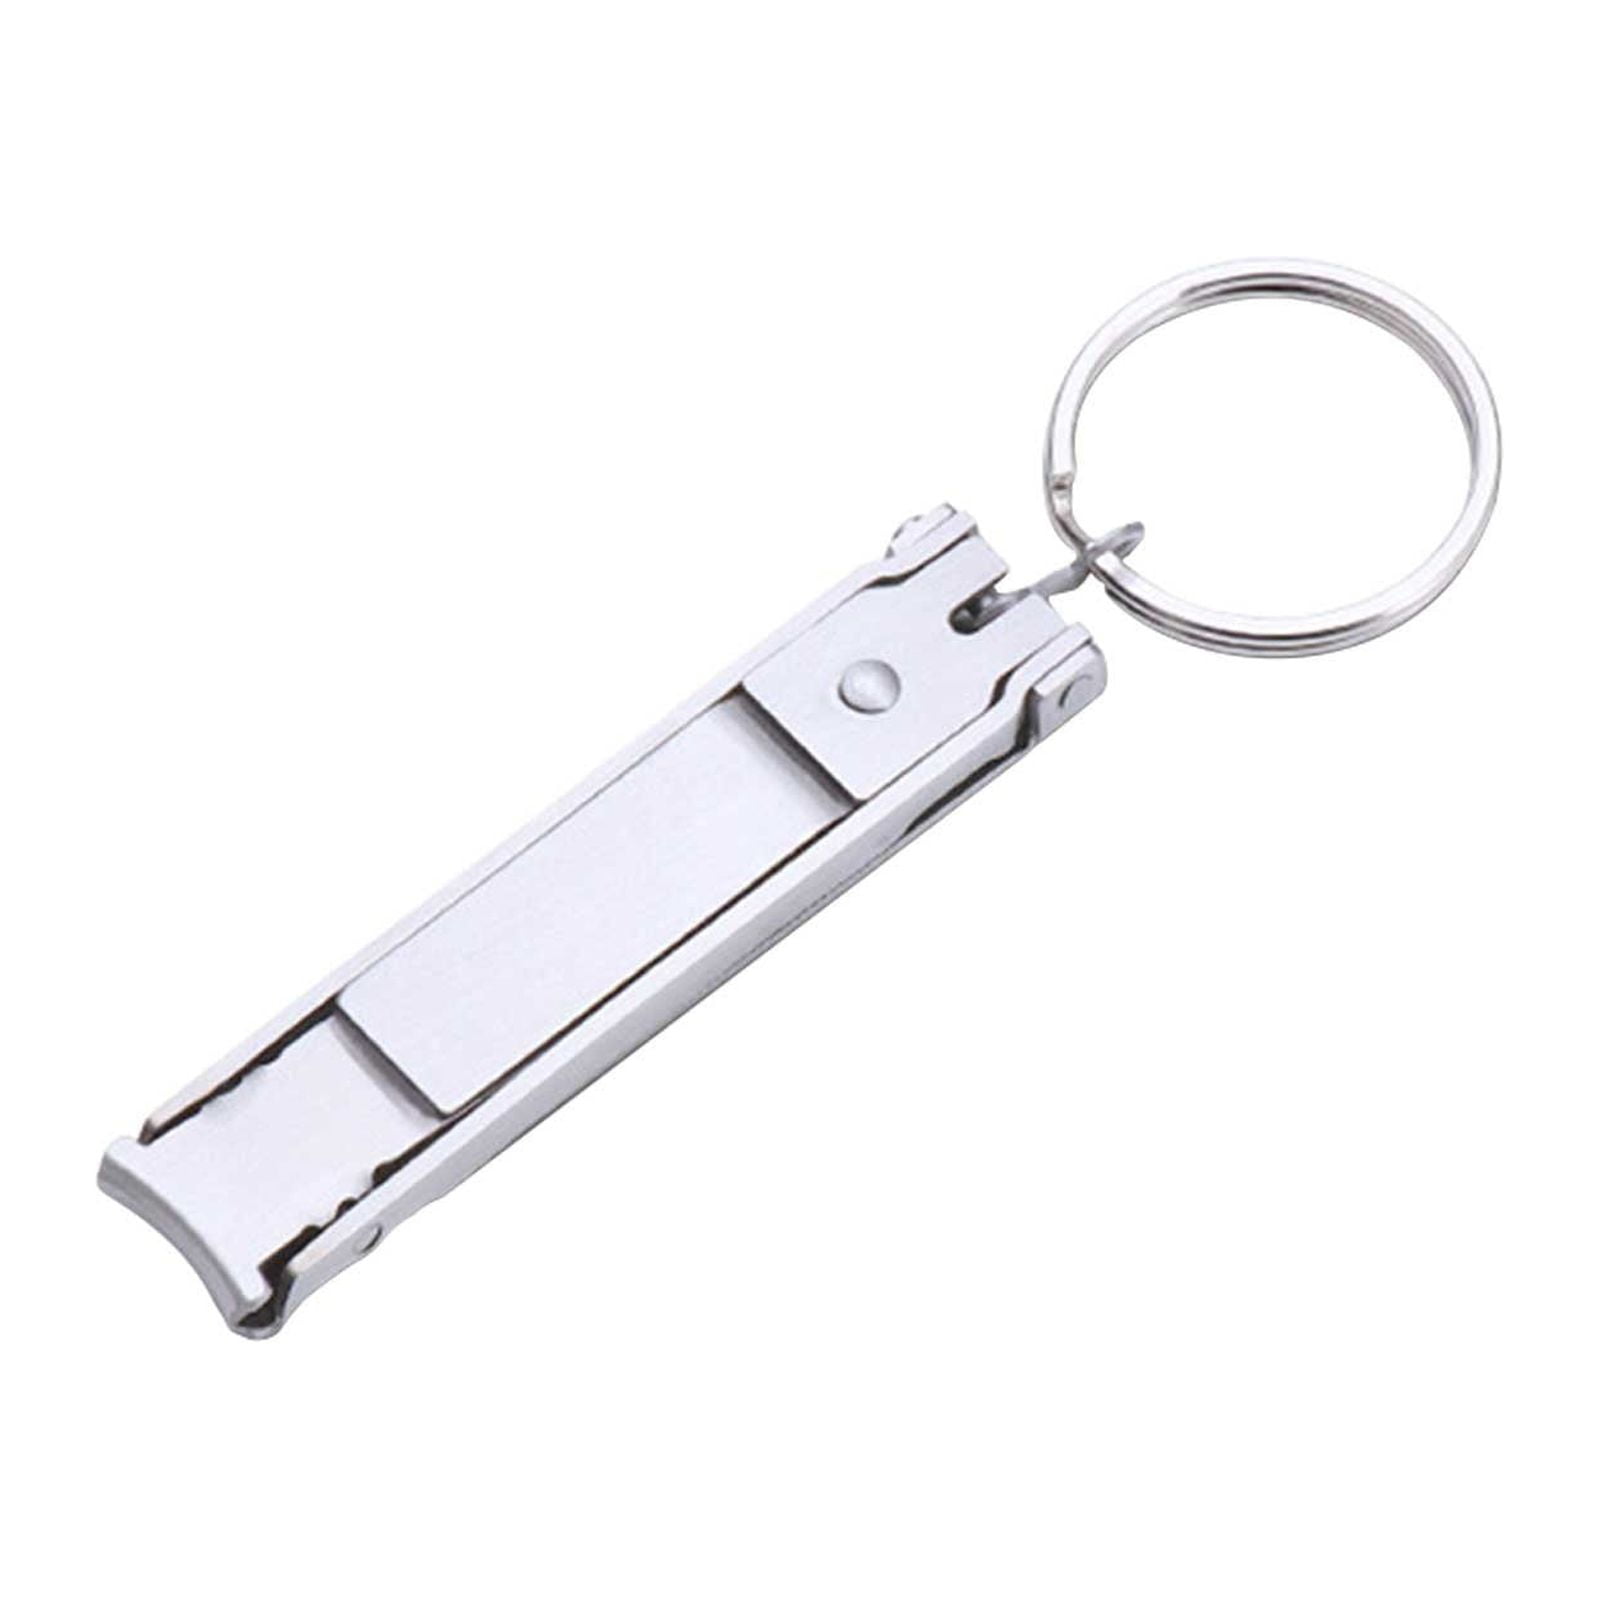 Nail clipper - I Love Amsterdam﻿﻿ - Keychain - Keychains • Souvenirs from  Holland